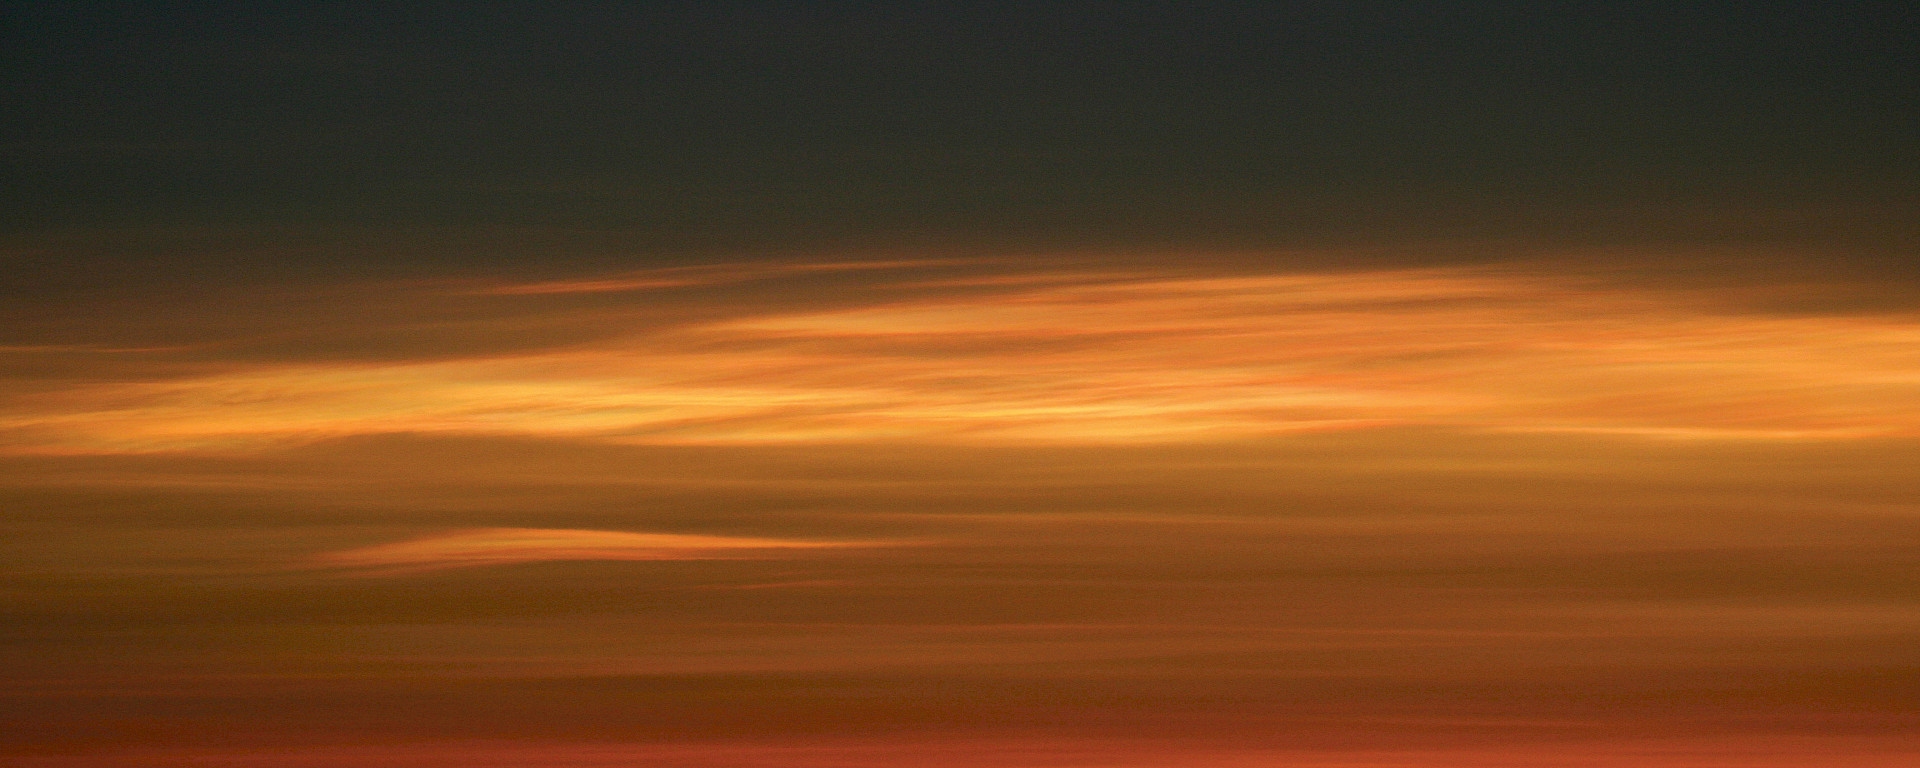 Stratospheric clouds, seen here illuminated by the sun during twilight